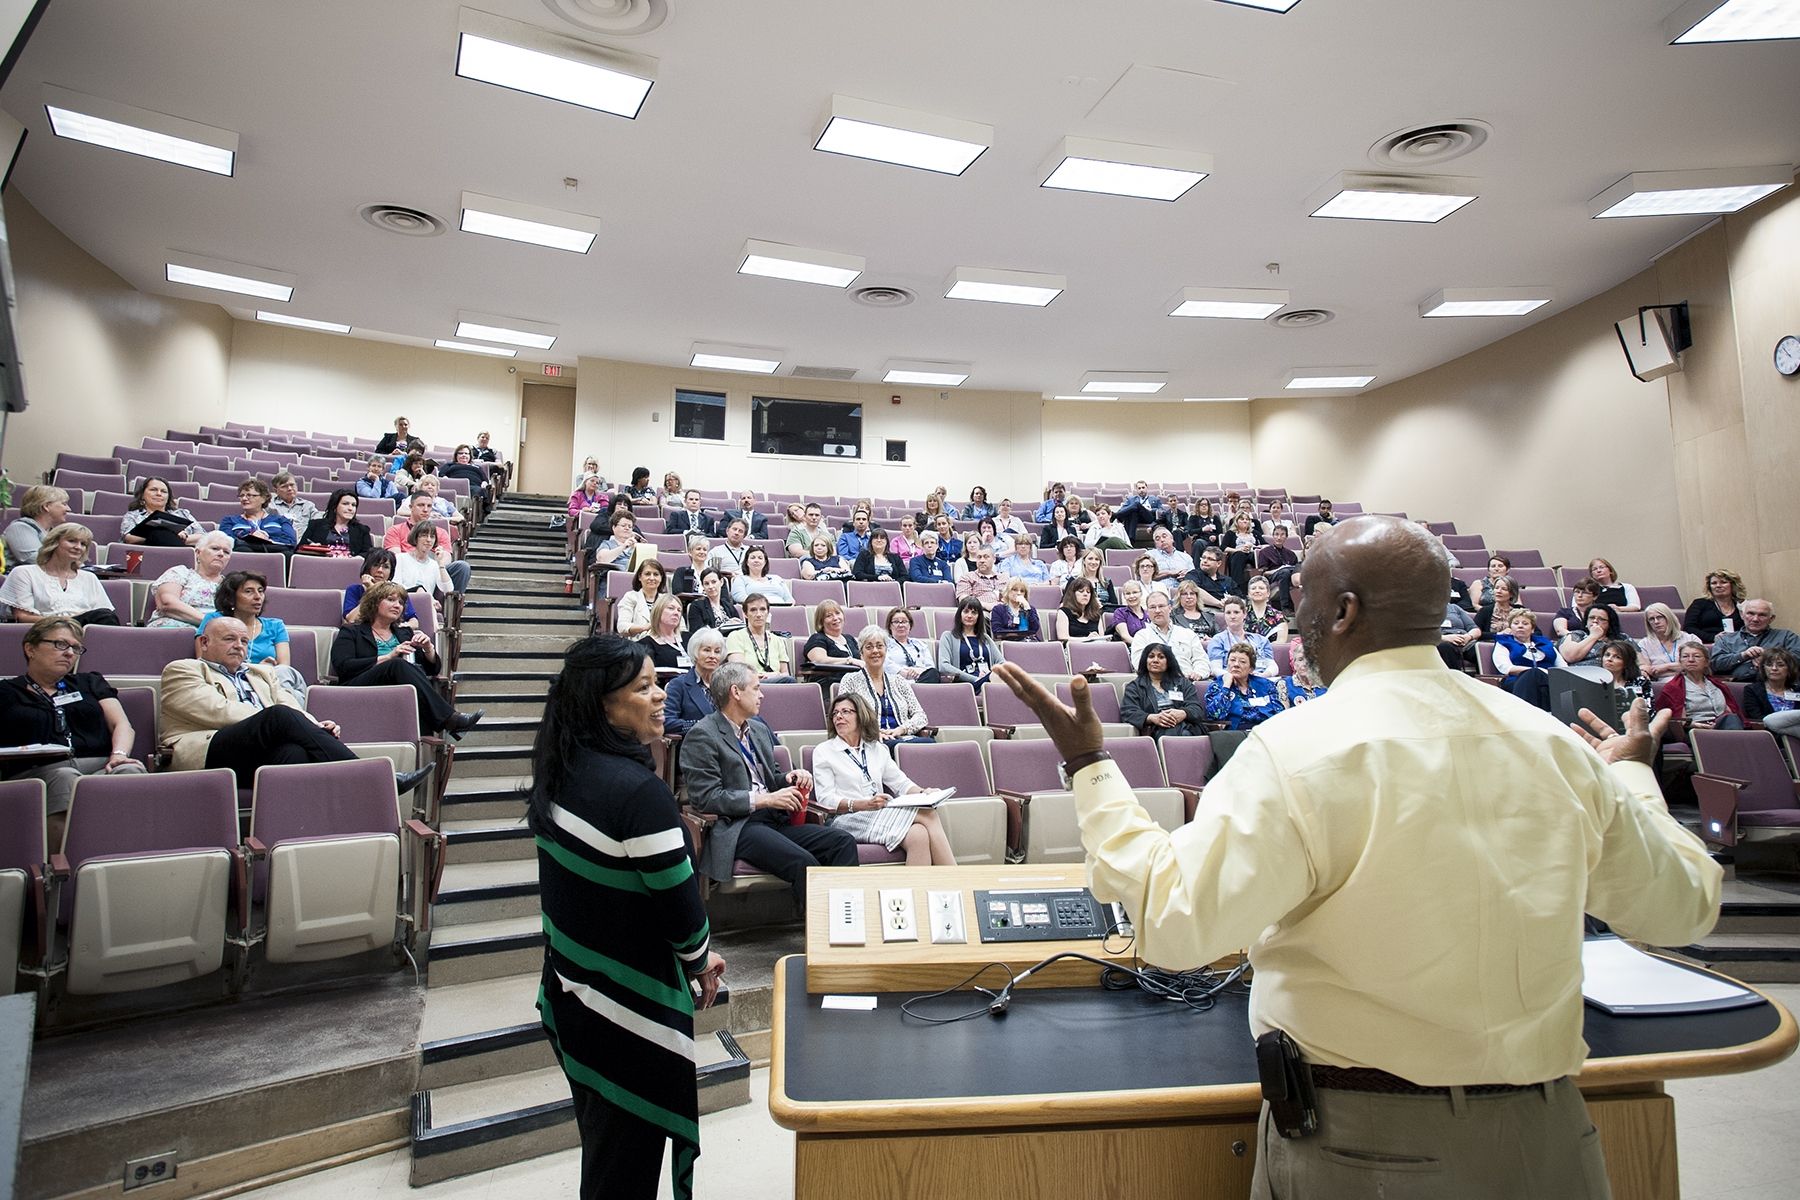 The new online calendar will help you save the date for interprofessional learning events, such as this presentation by our friends from the Georgia Regents Medical Centre in 2013